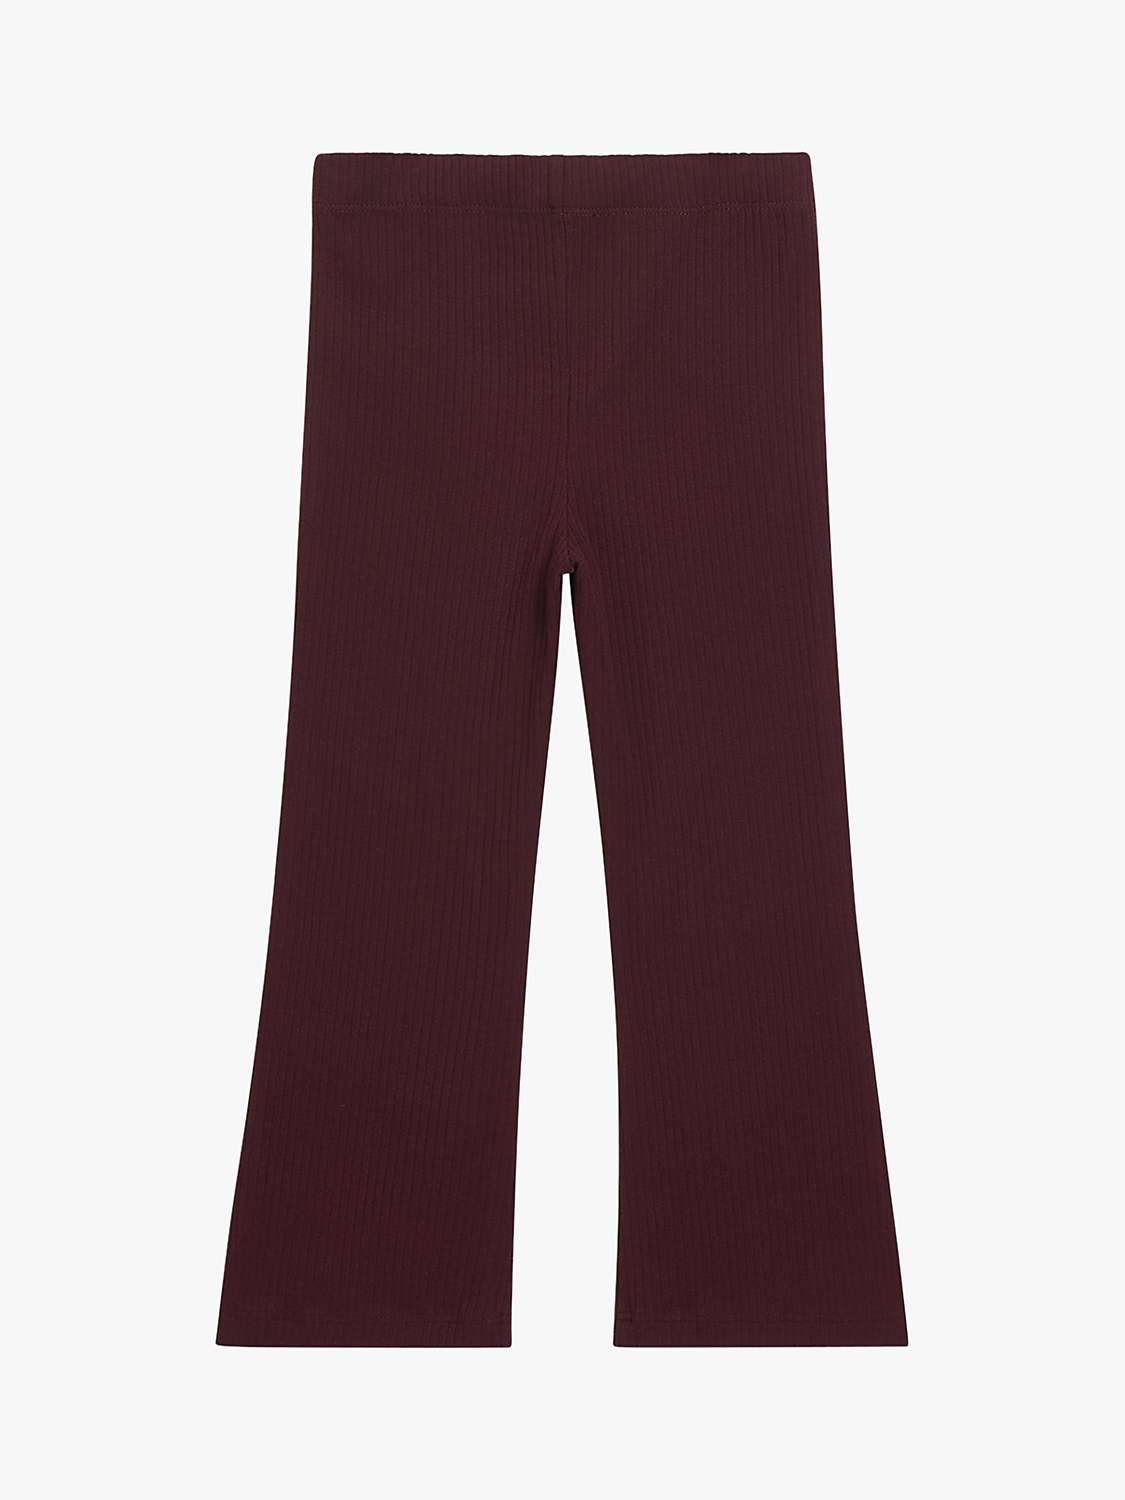 Buy Whistles Kids' Ribbed Flare Trousers, Aubergine Online at johnlewis.com